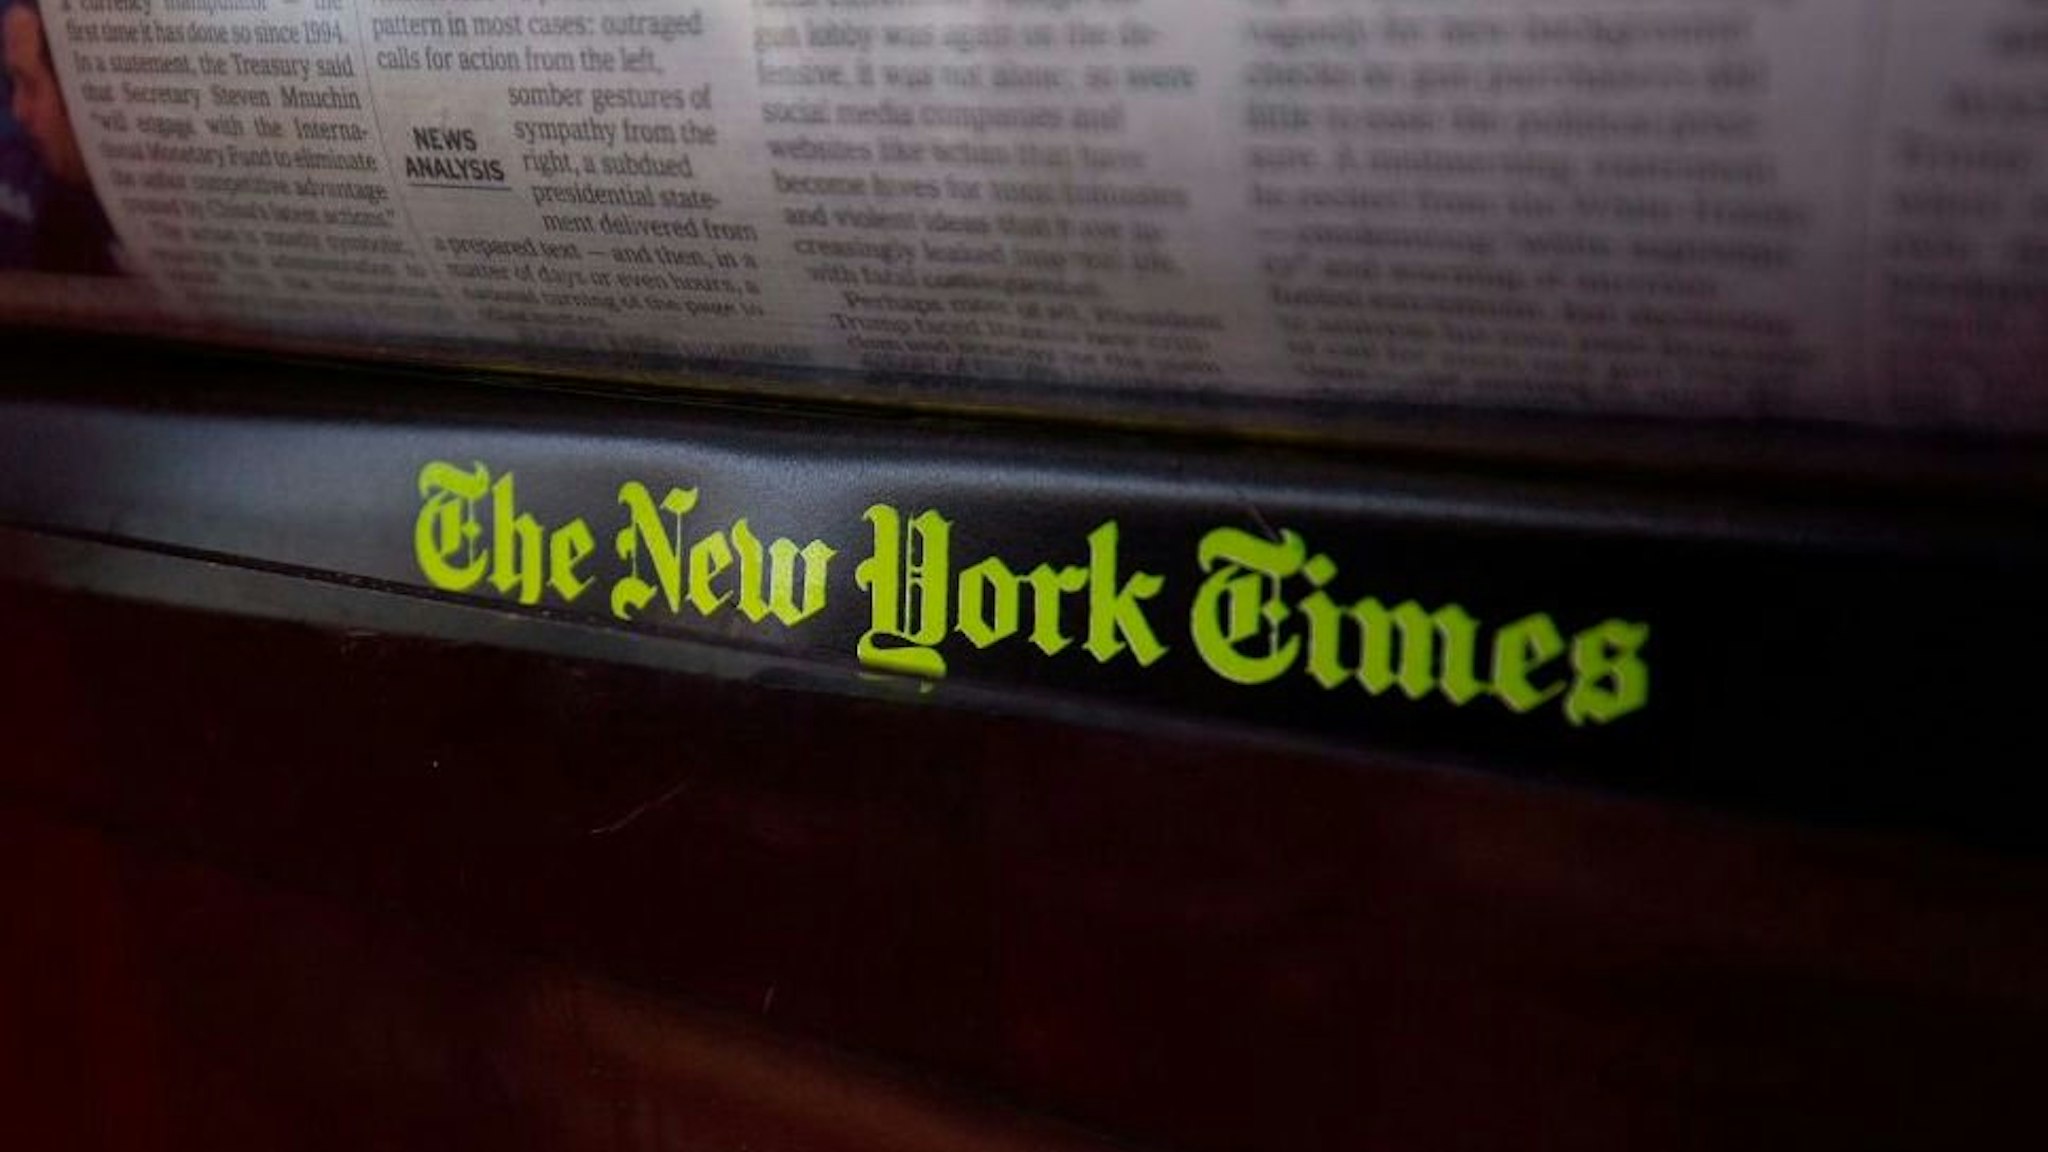 The New York Times logo is seen on a newspaper rack at a convenience store in Washington, DC, on August 6, 2019.